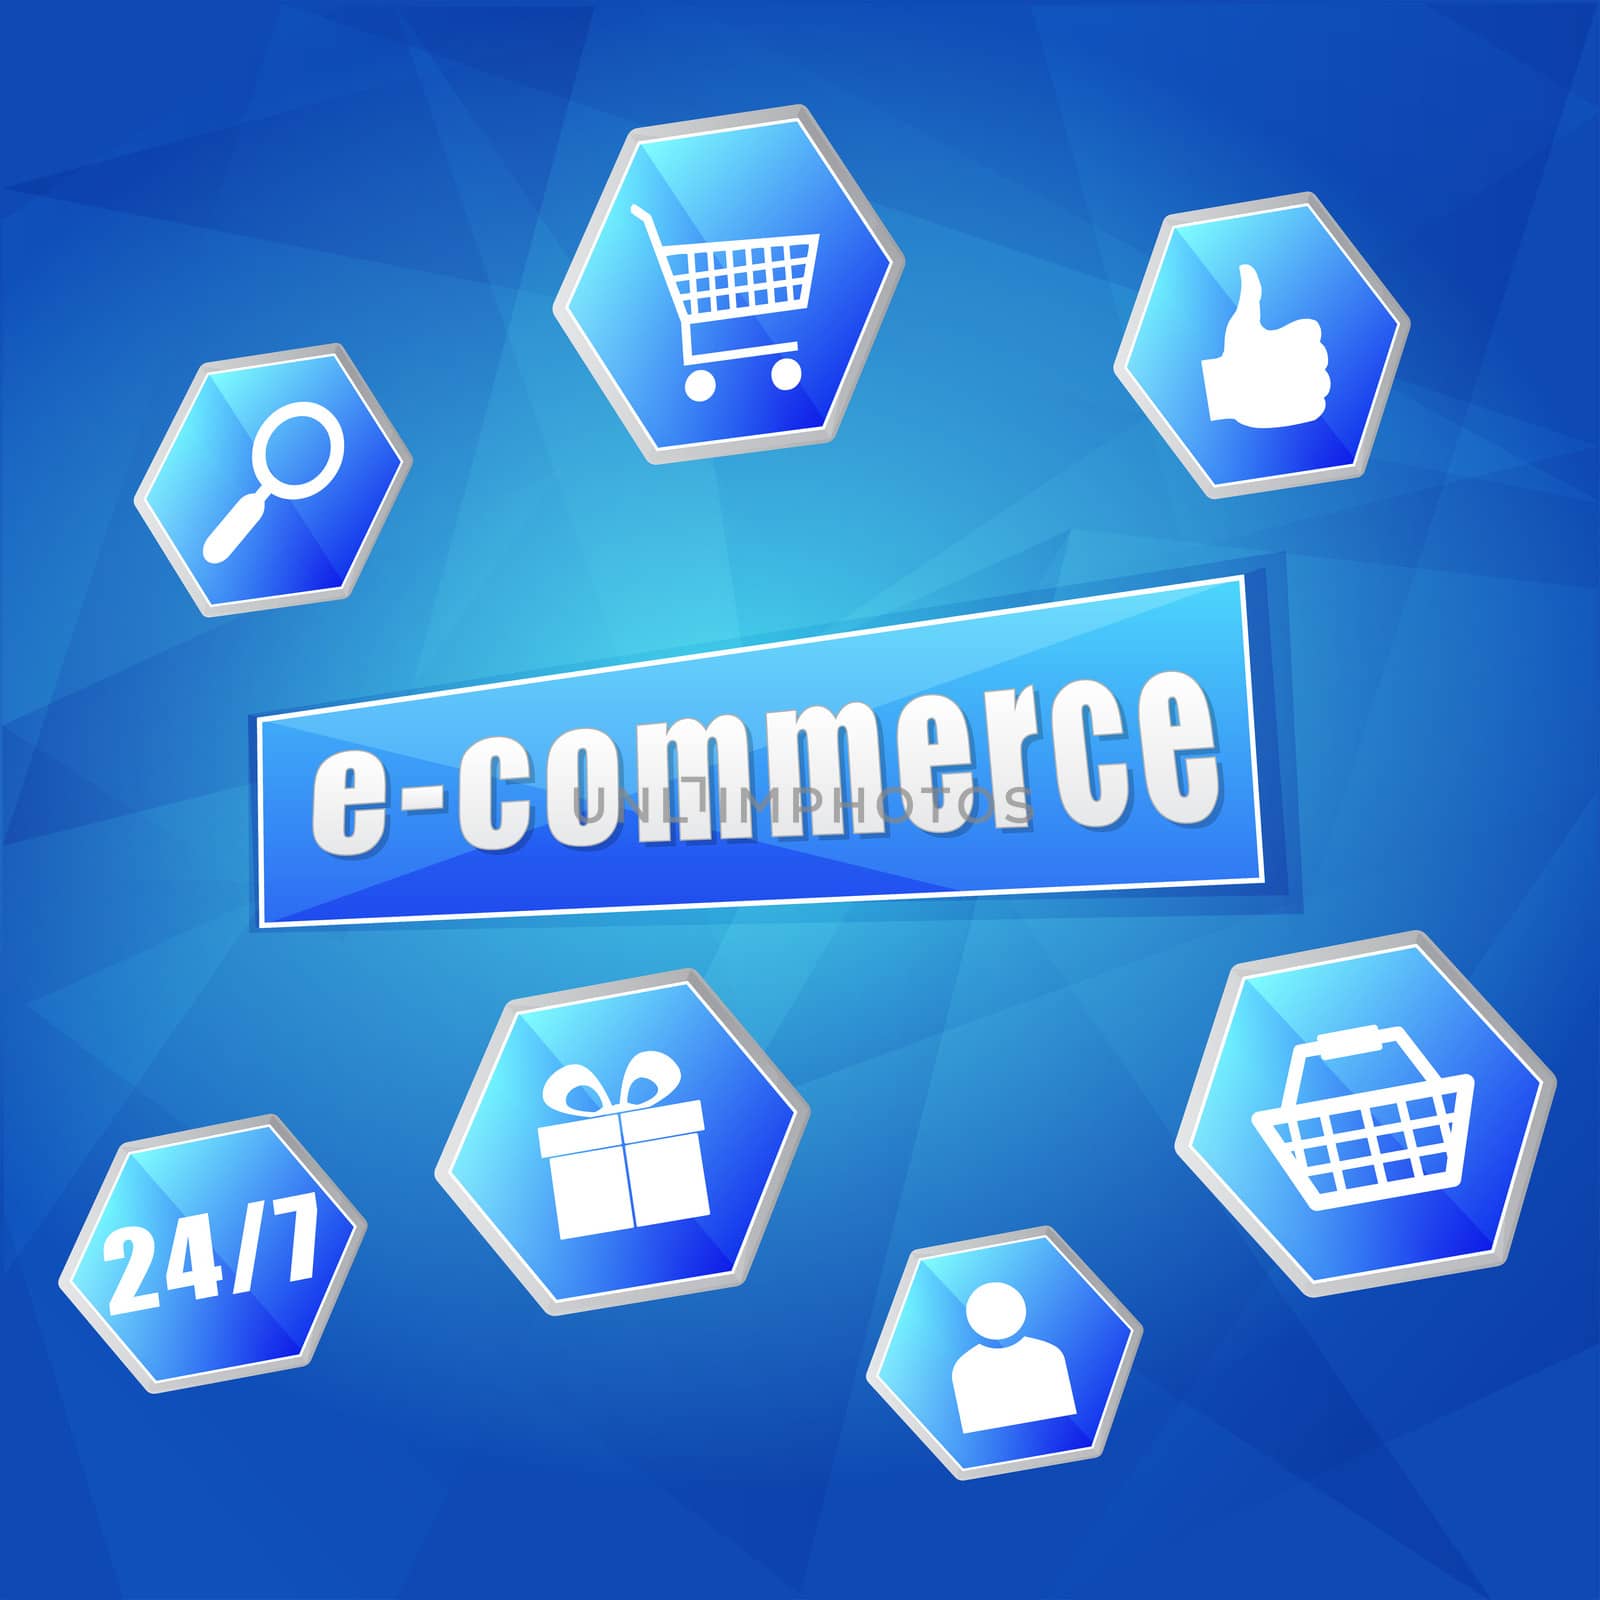 e-commerce and business internet concept signs - text and symbols in hexagons over blue background, flat design